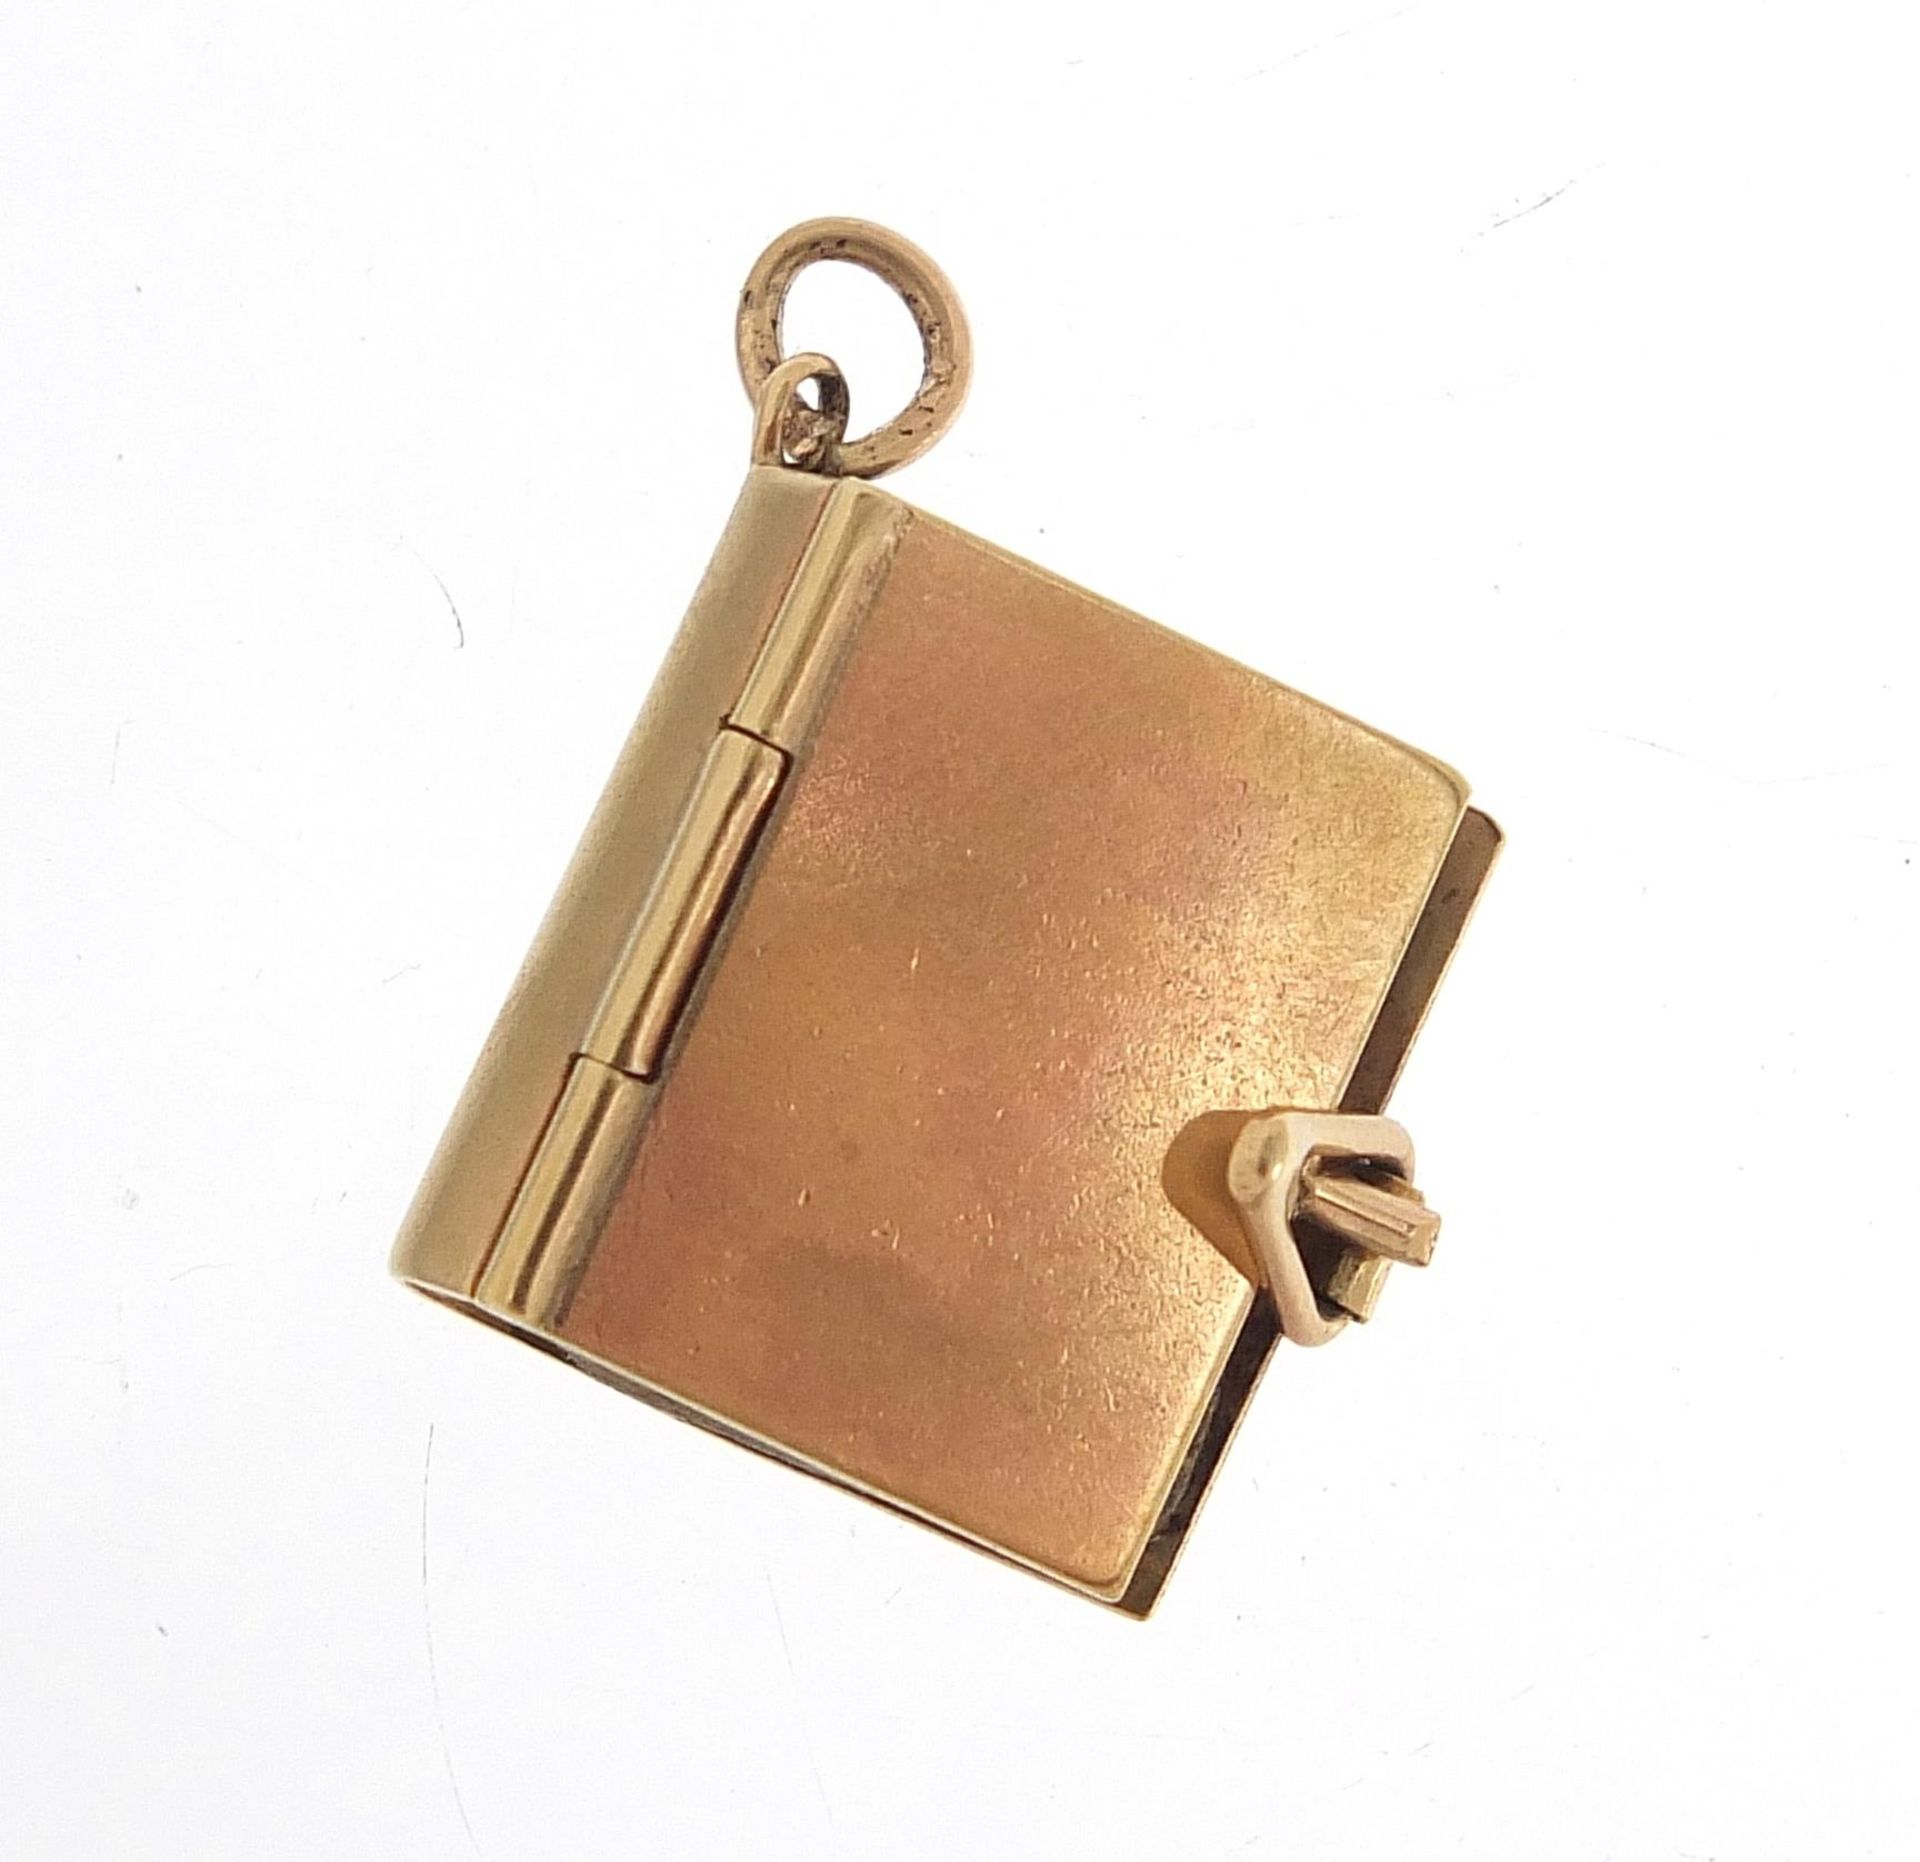 9ct gold Scenes of London folding book charm, 1.5cm high, 3.2g